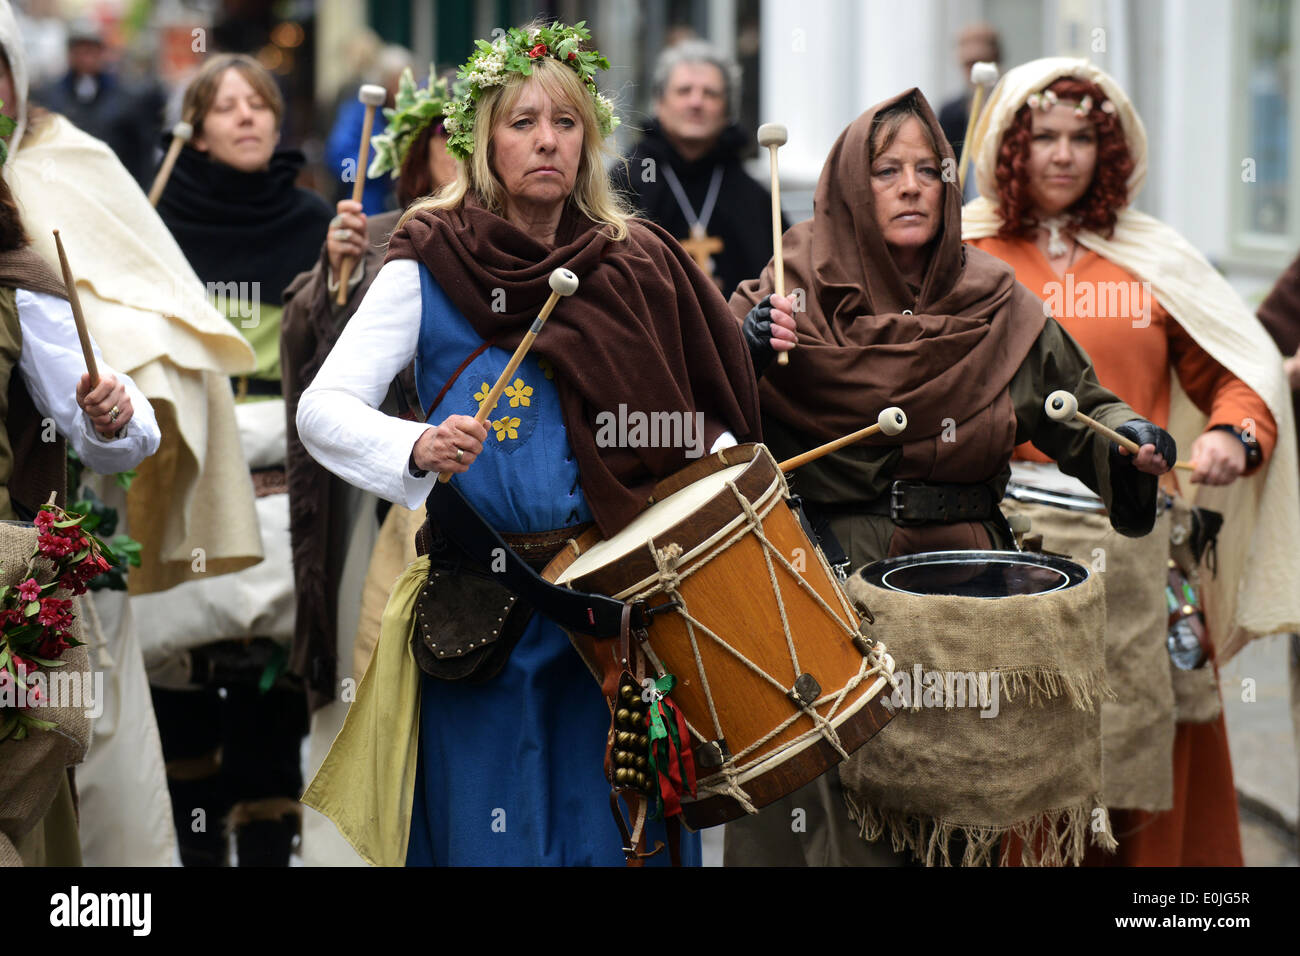 A group of people dressed in costumes and celebrating the Battle of Lewes in Lewes High Street, East Sussex, UK. Stock Photo